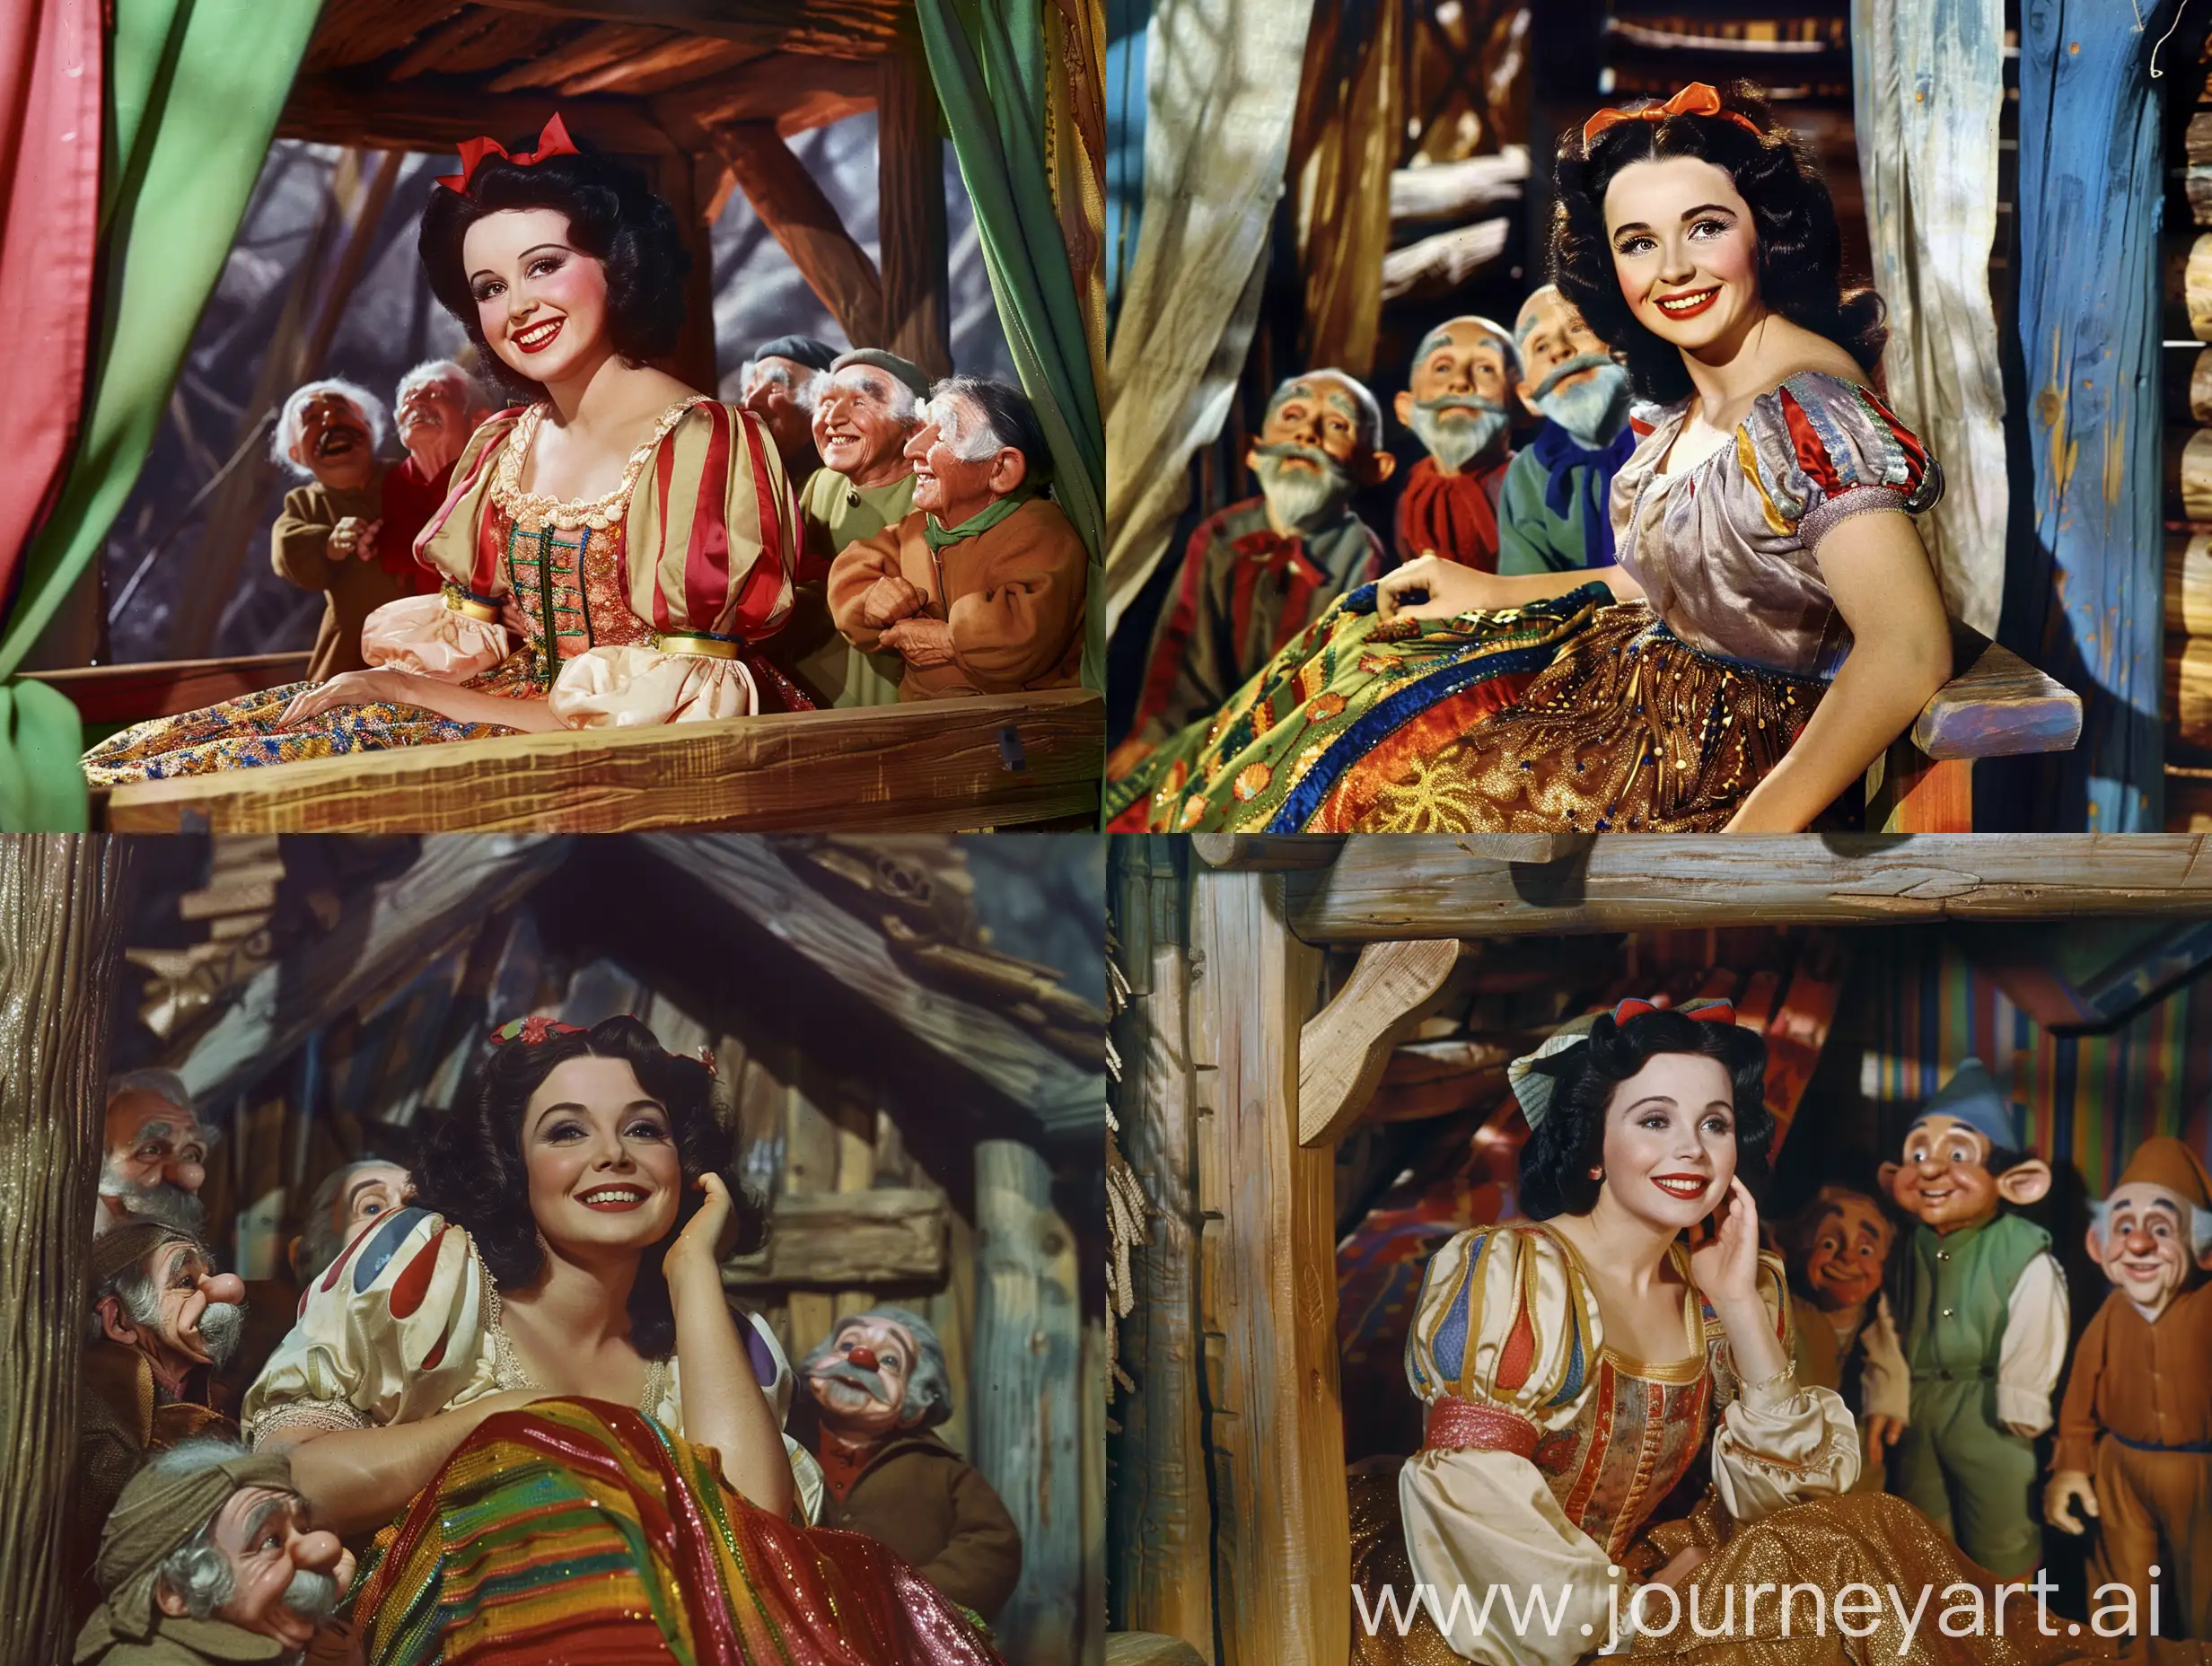 Elizabeth-Taylor-as-Snow-White-in-Colorful-Cabin-with-Seven-Kind-Dwarfs